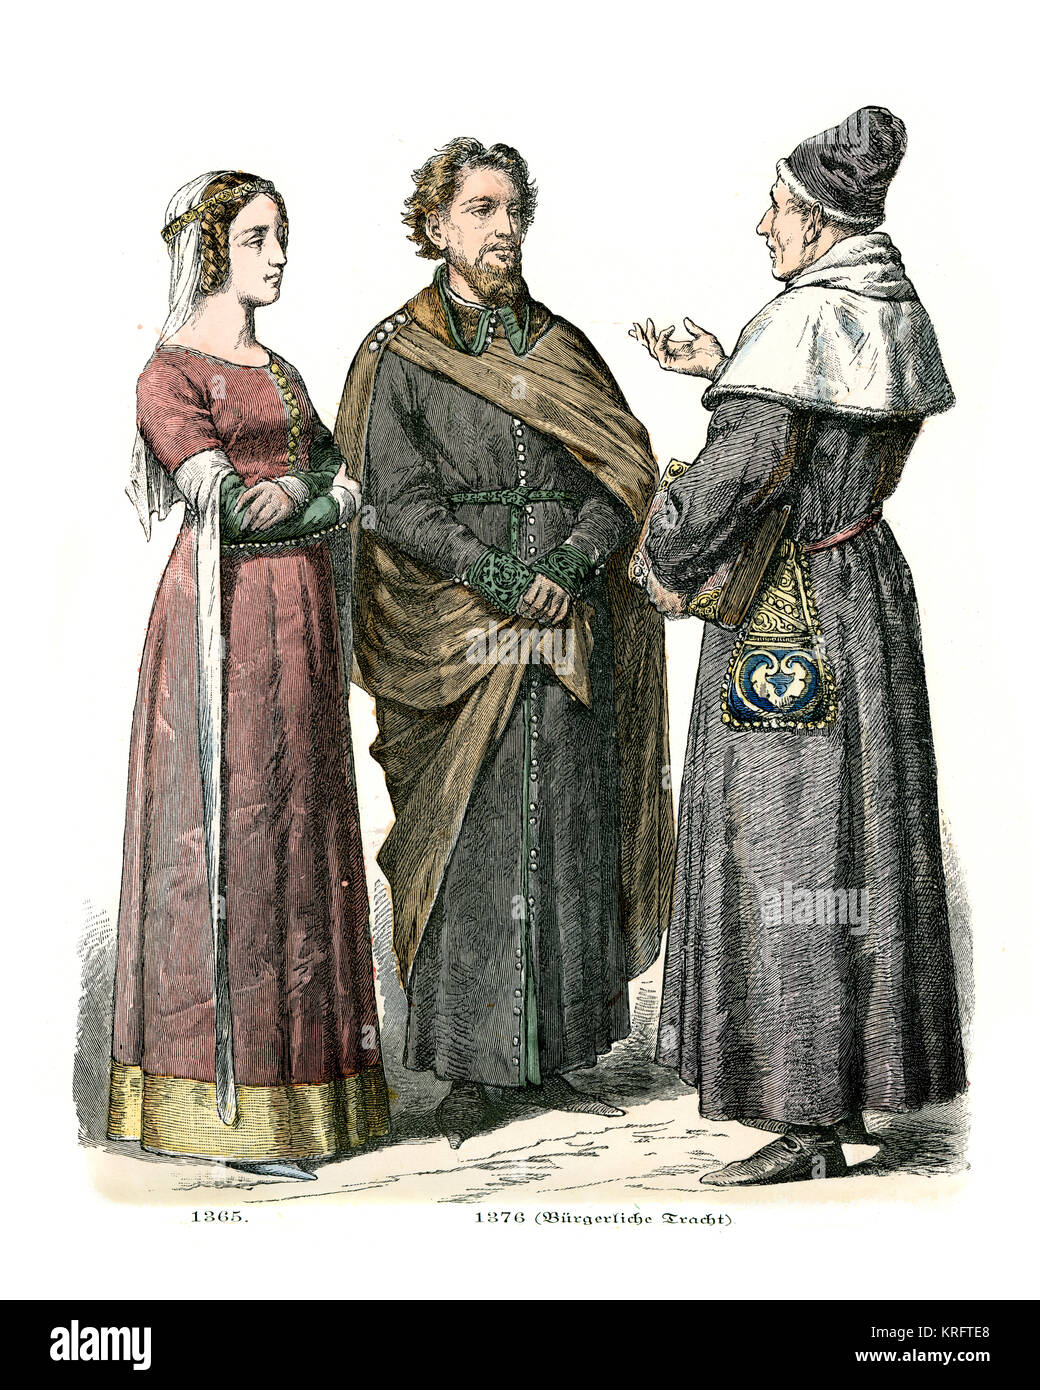 Vintage engraving of English Medieval fashions of common people, 14th Century Stock Photo